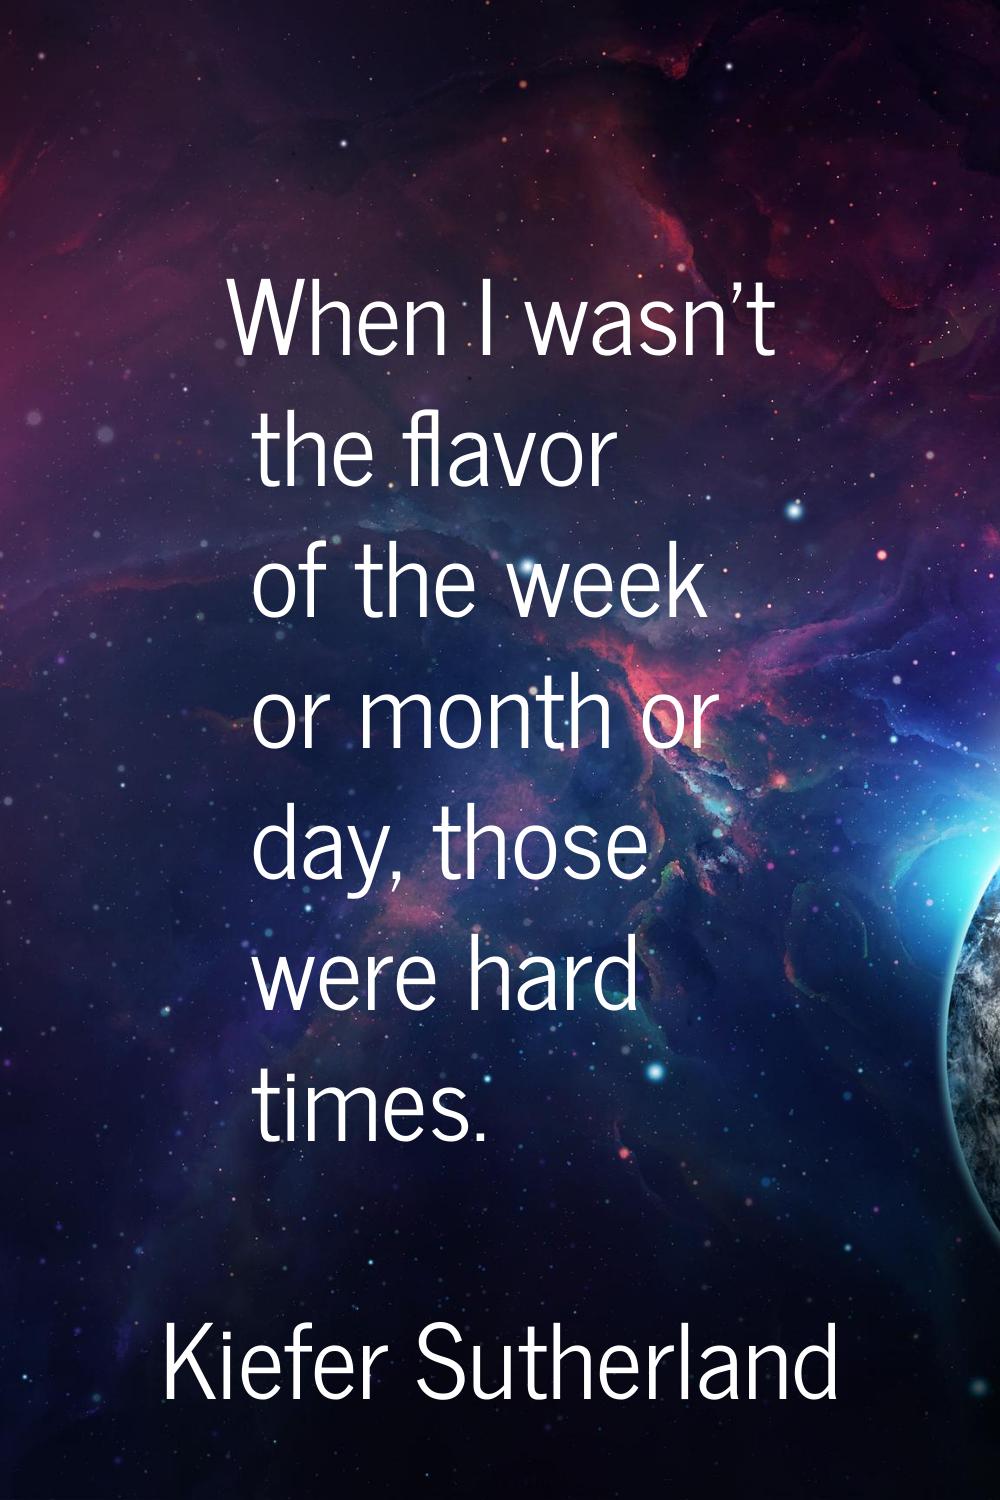 When I wasn't the flavor of the week or month or day, those were hard times.